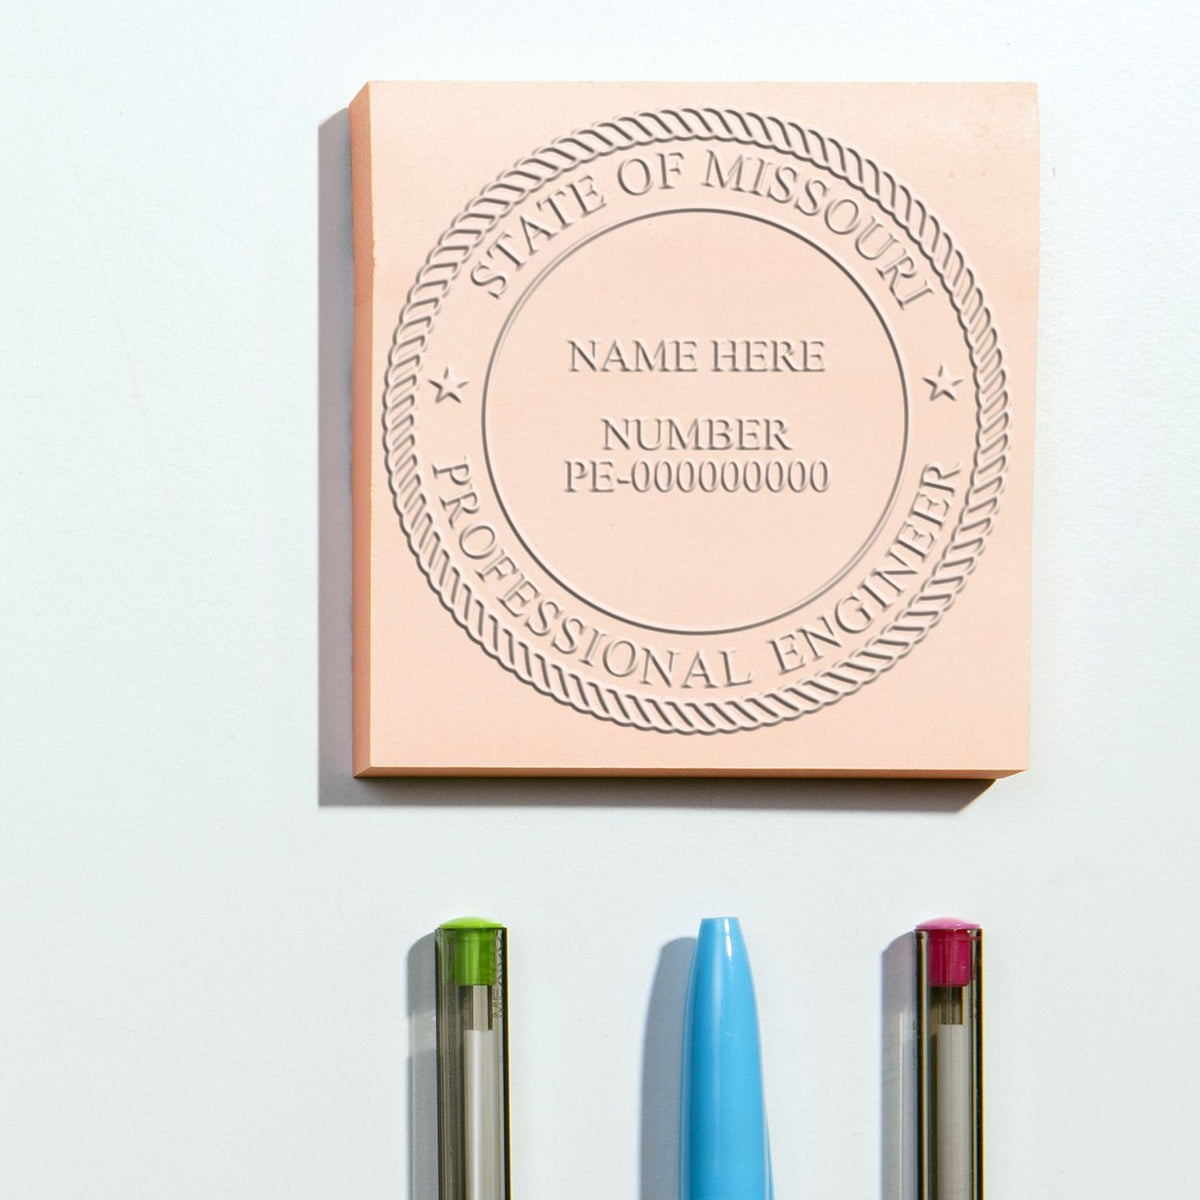 A stamped impression of the Soft Missouri Professional Engineer Seal in this stylish lifestyle photo, setting the tone for a unique and personalized product.